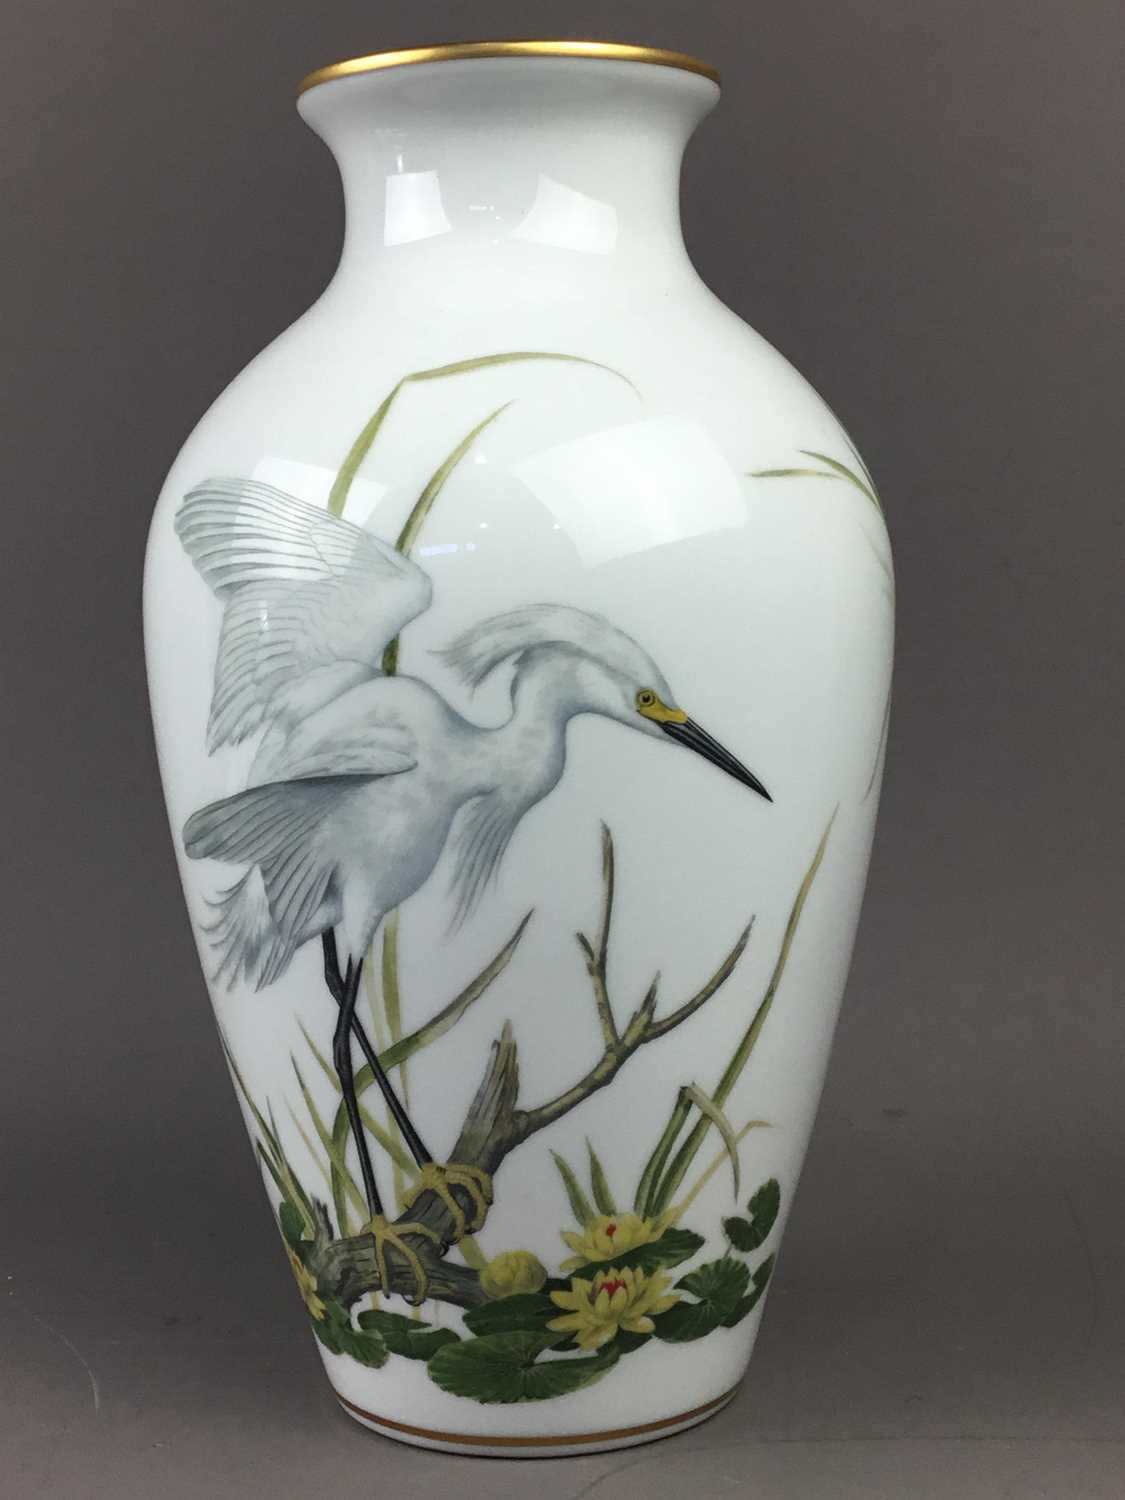 Lot 125 - A LOT OF THREE FRANKLIN MINT VASES ALONG WITH OTHER DECORATIVE CERAMICS